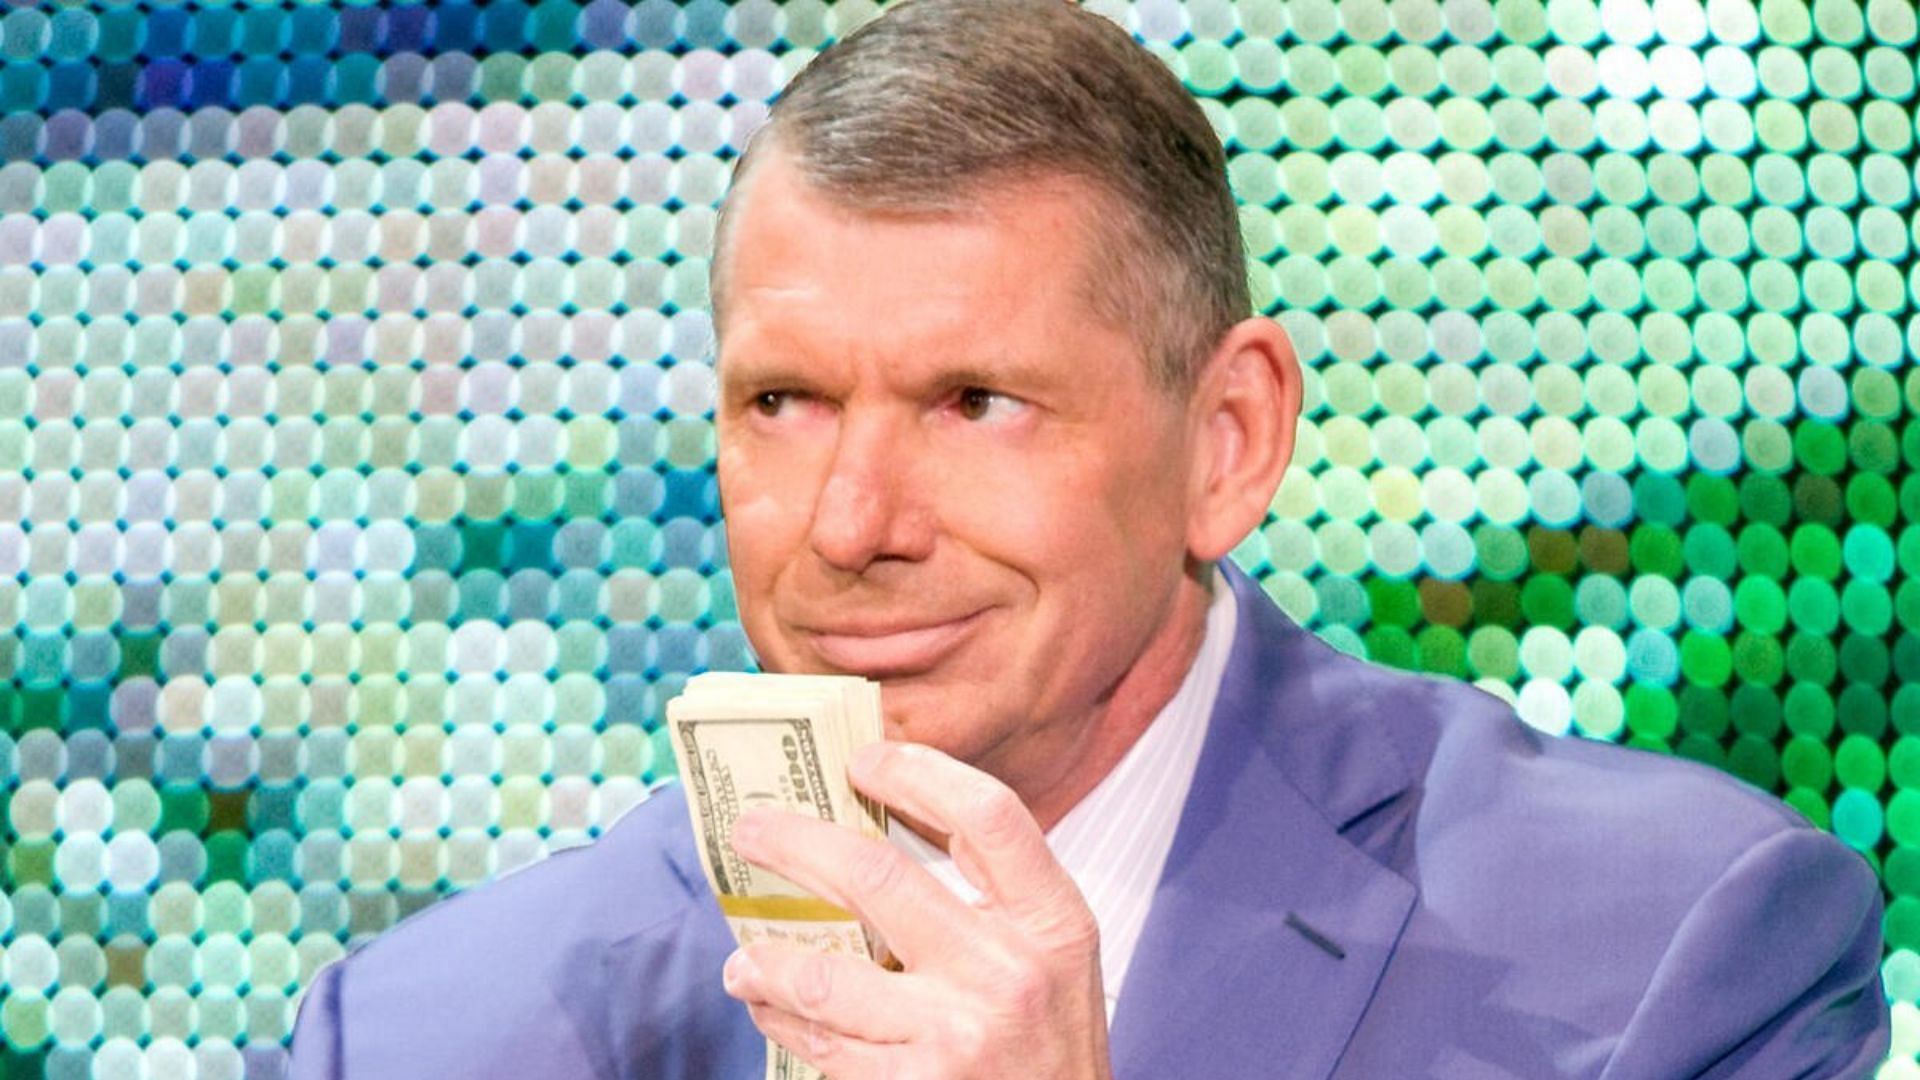 Vince McMahon is no longer associated with WWE (Credit: WWE)